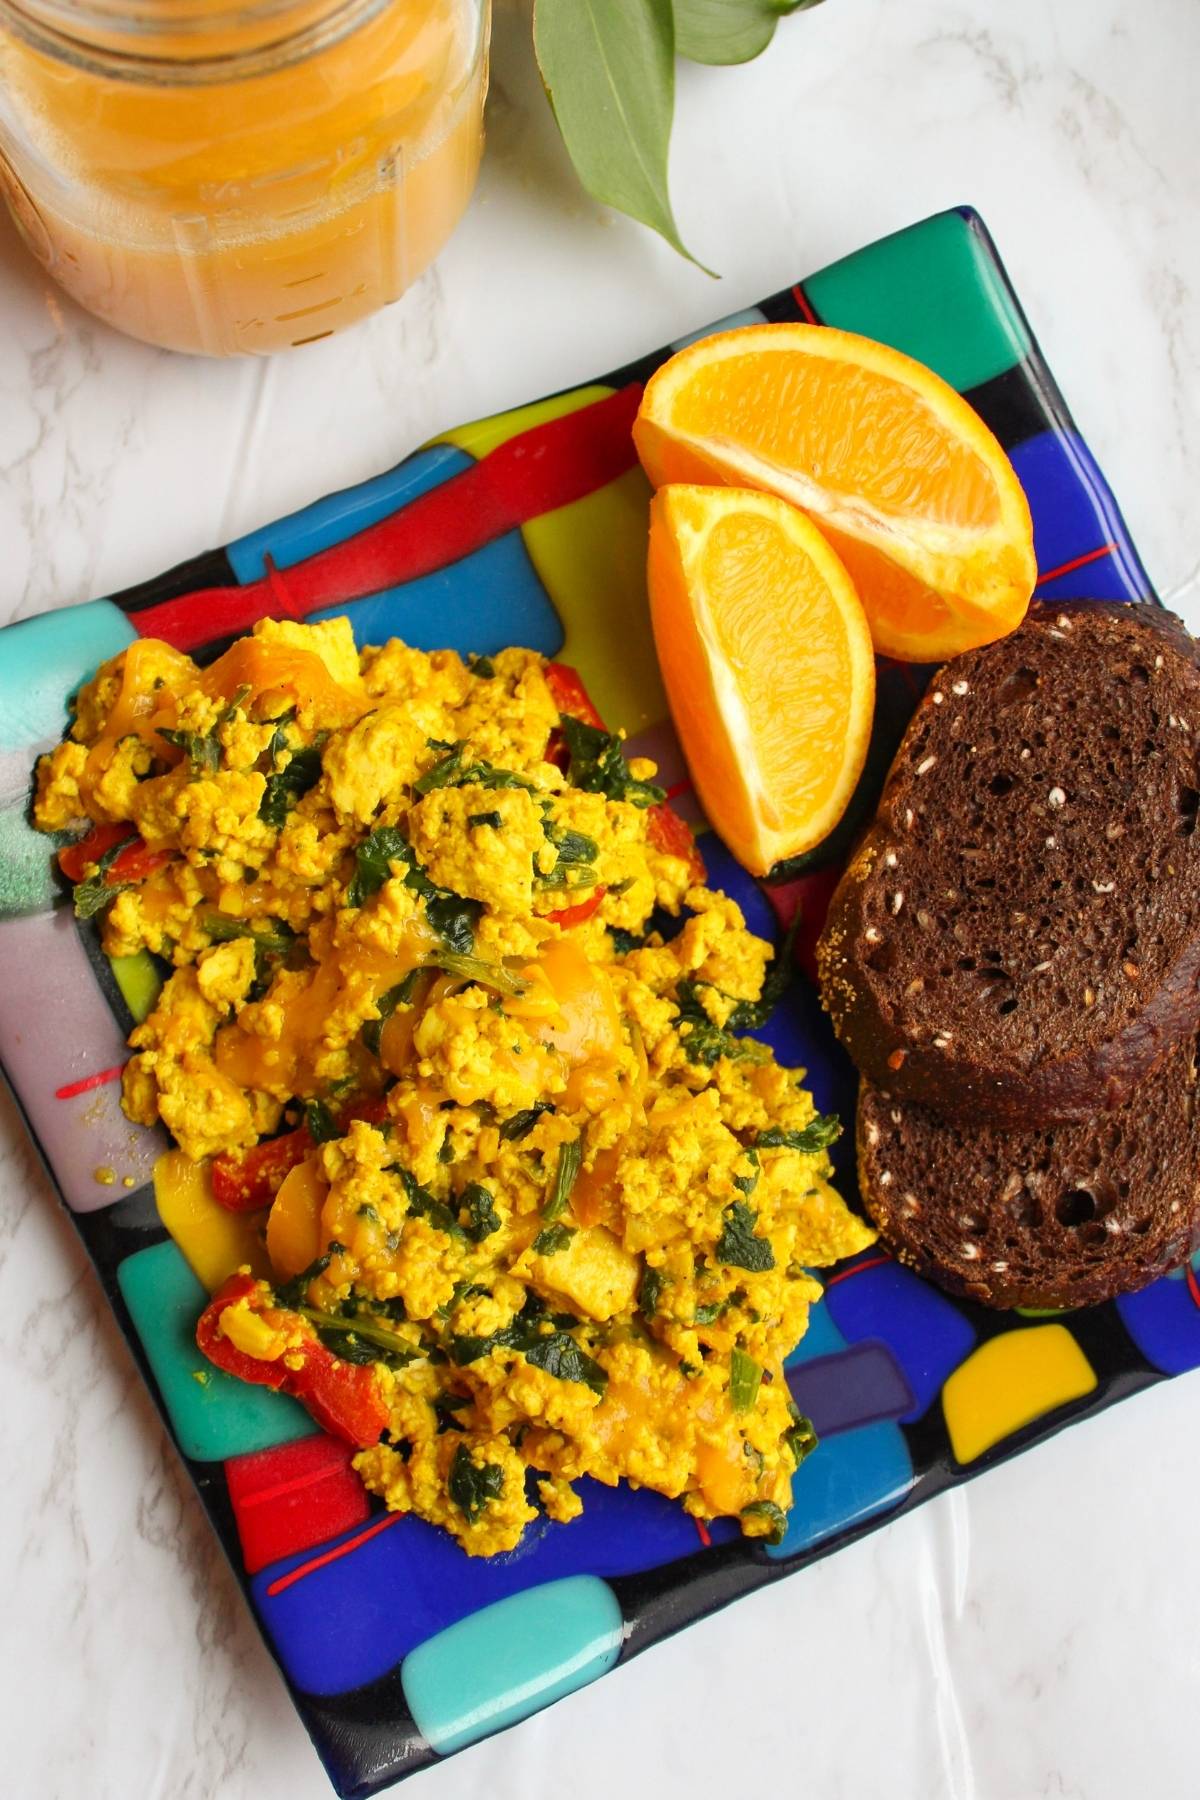 Plate with vegan scrambled eggs, toast and orange slices.